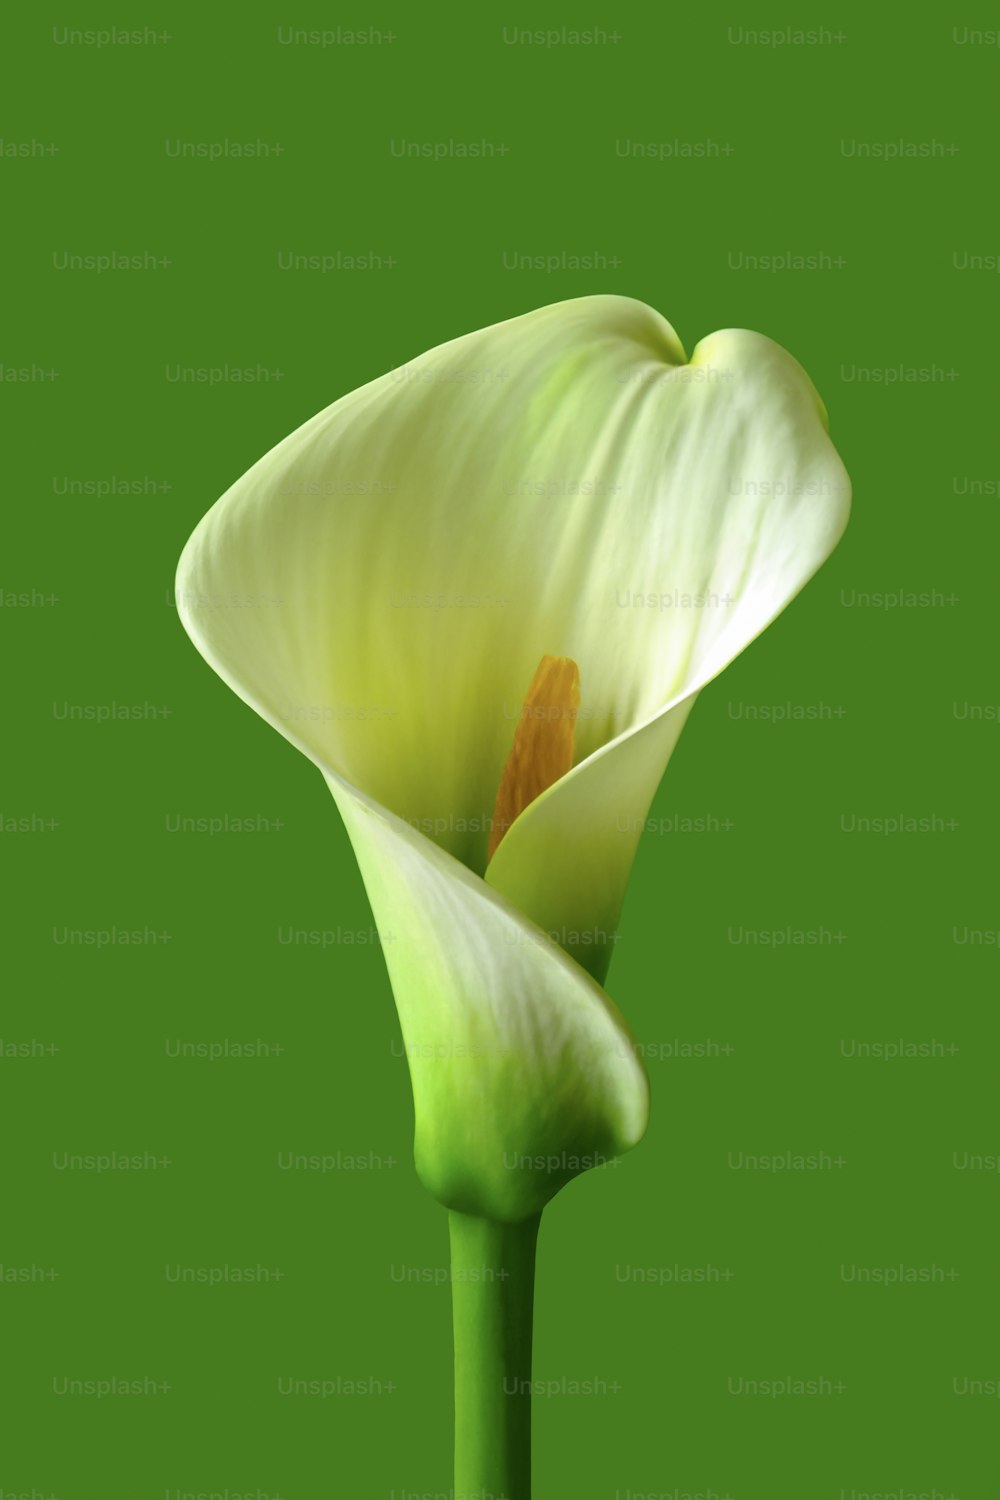 a single white flower on a green background